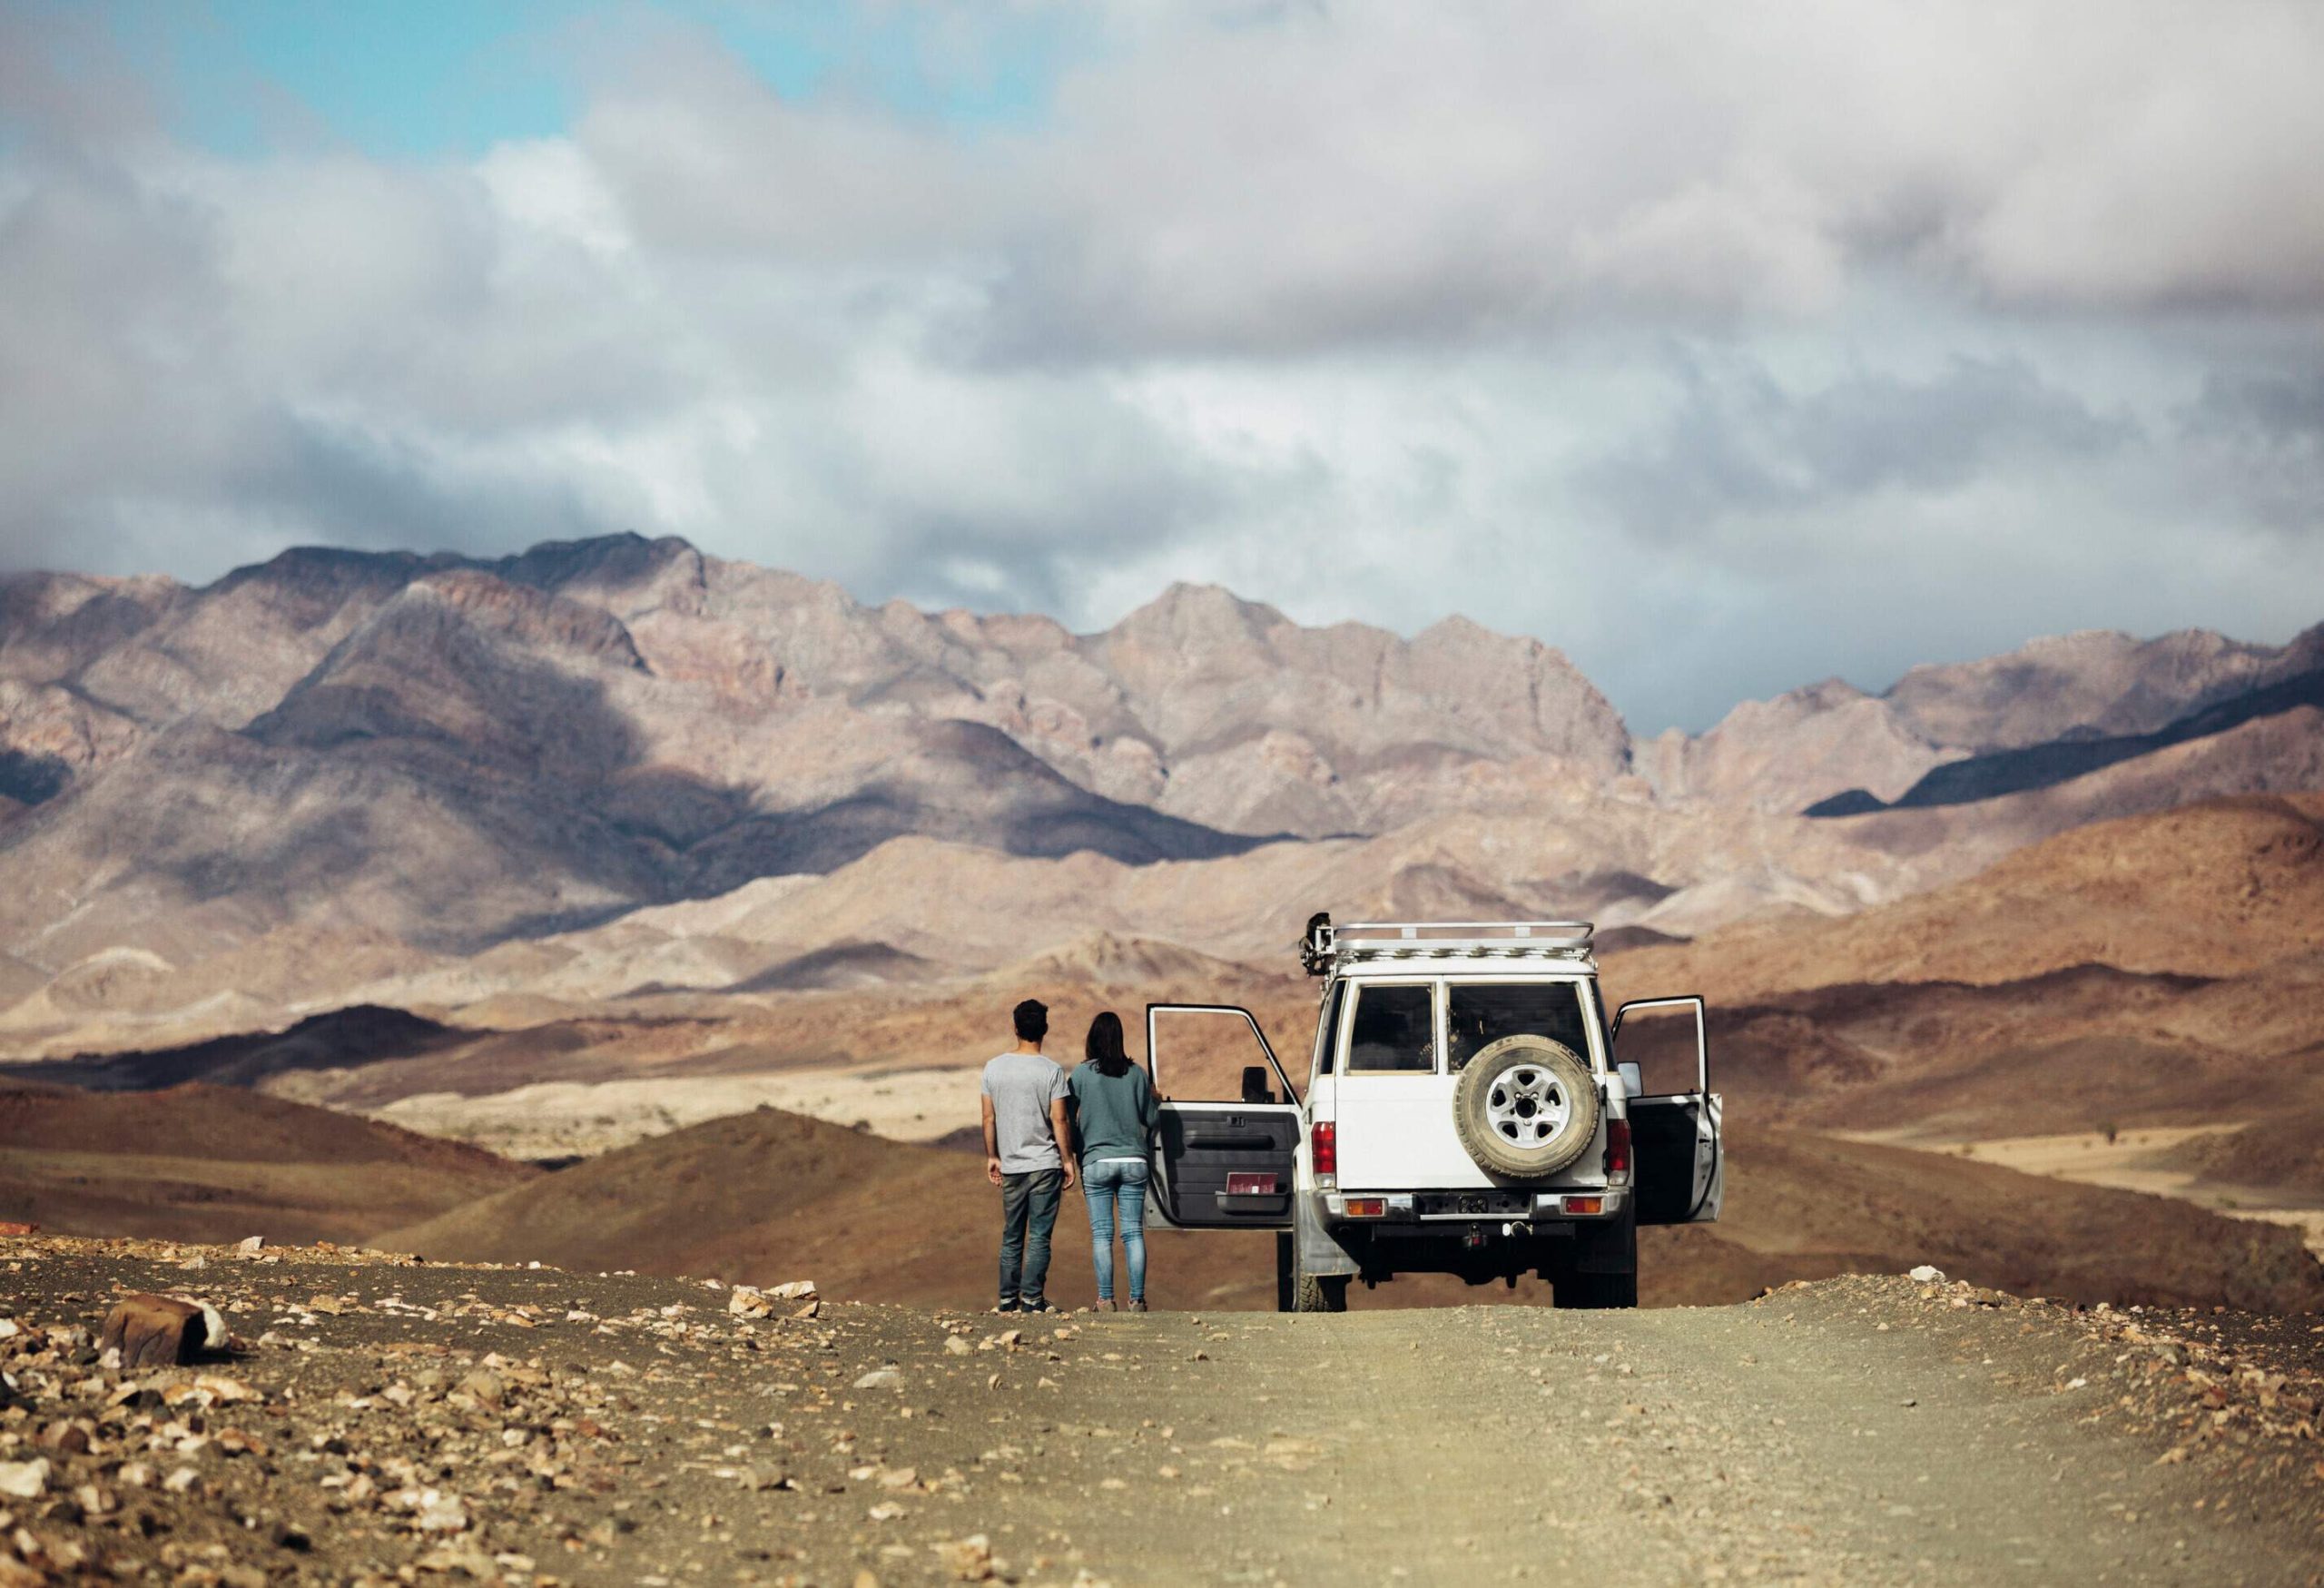 A couple stands next to their vehicle, overlooking the undulating rocky mountain range under the gloomy sky.